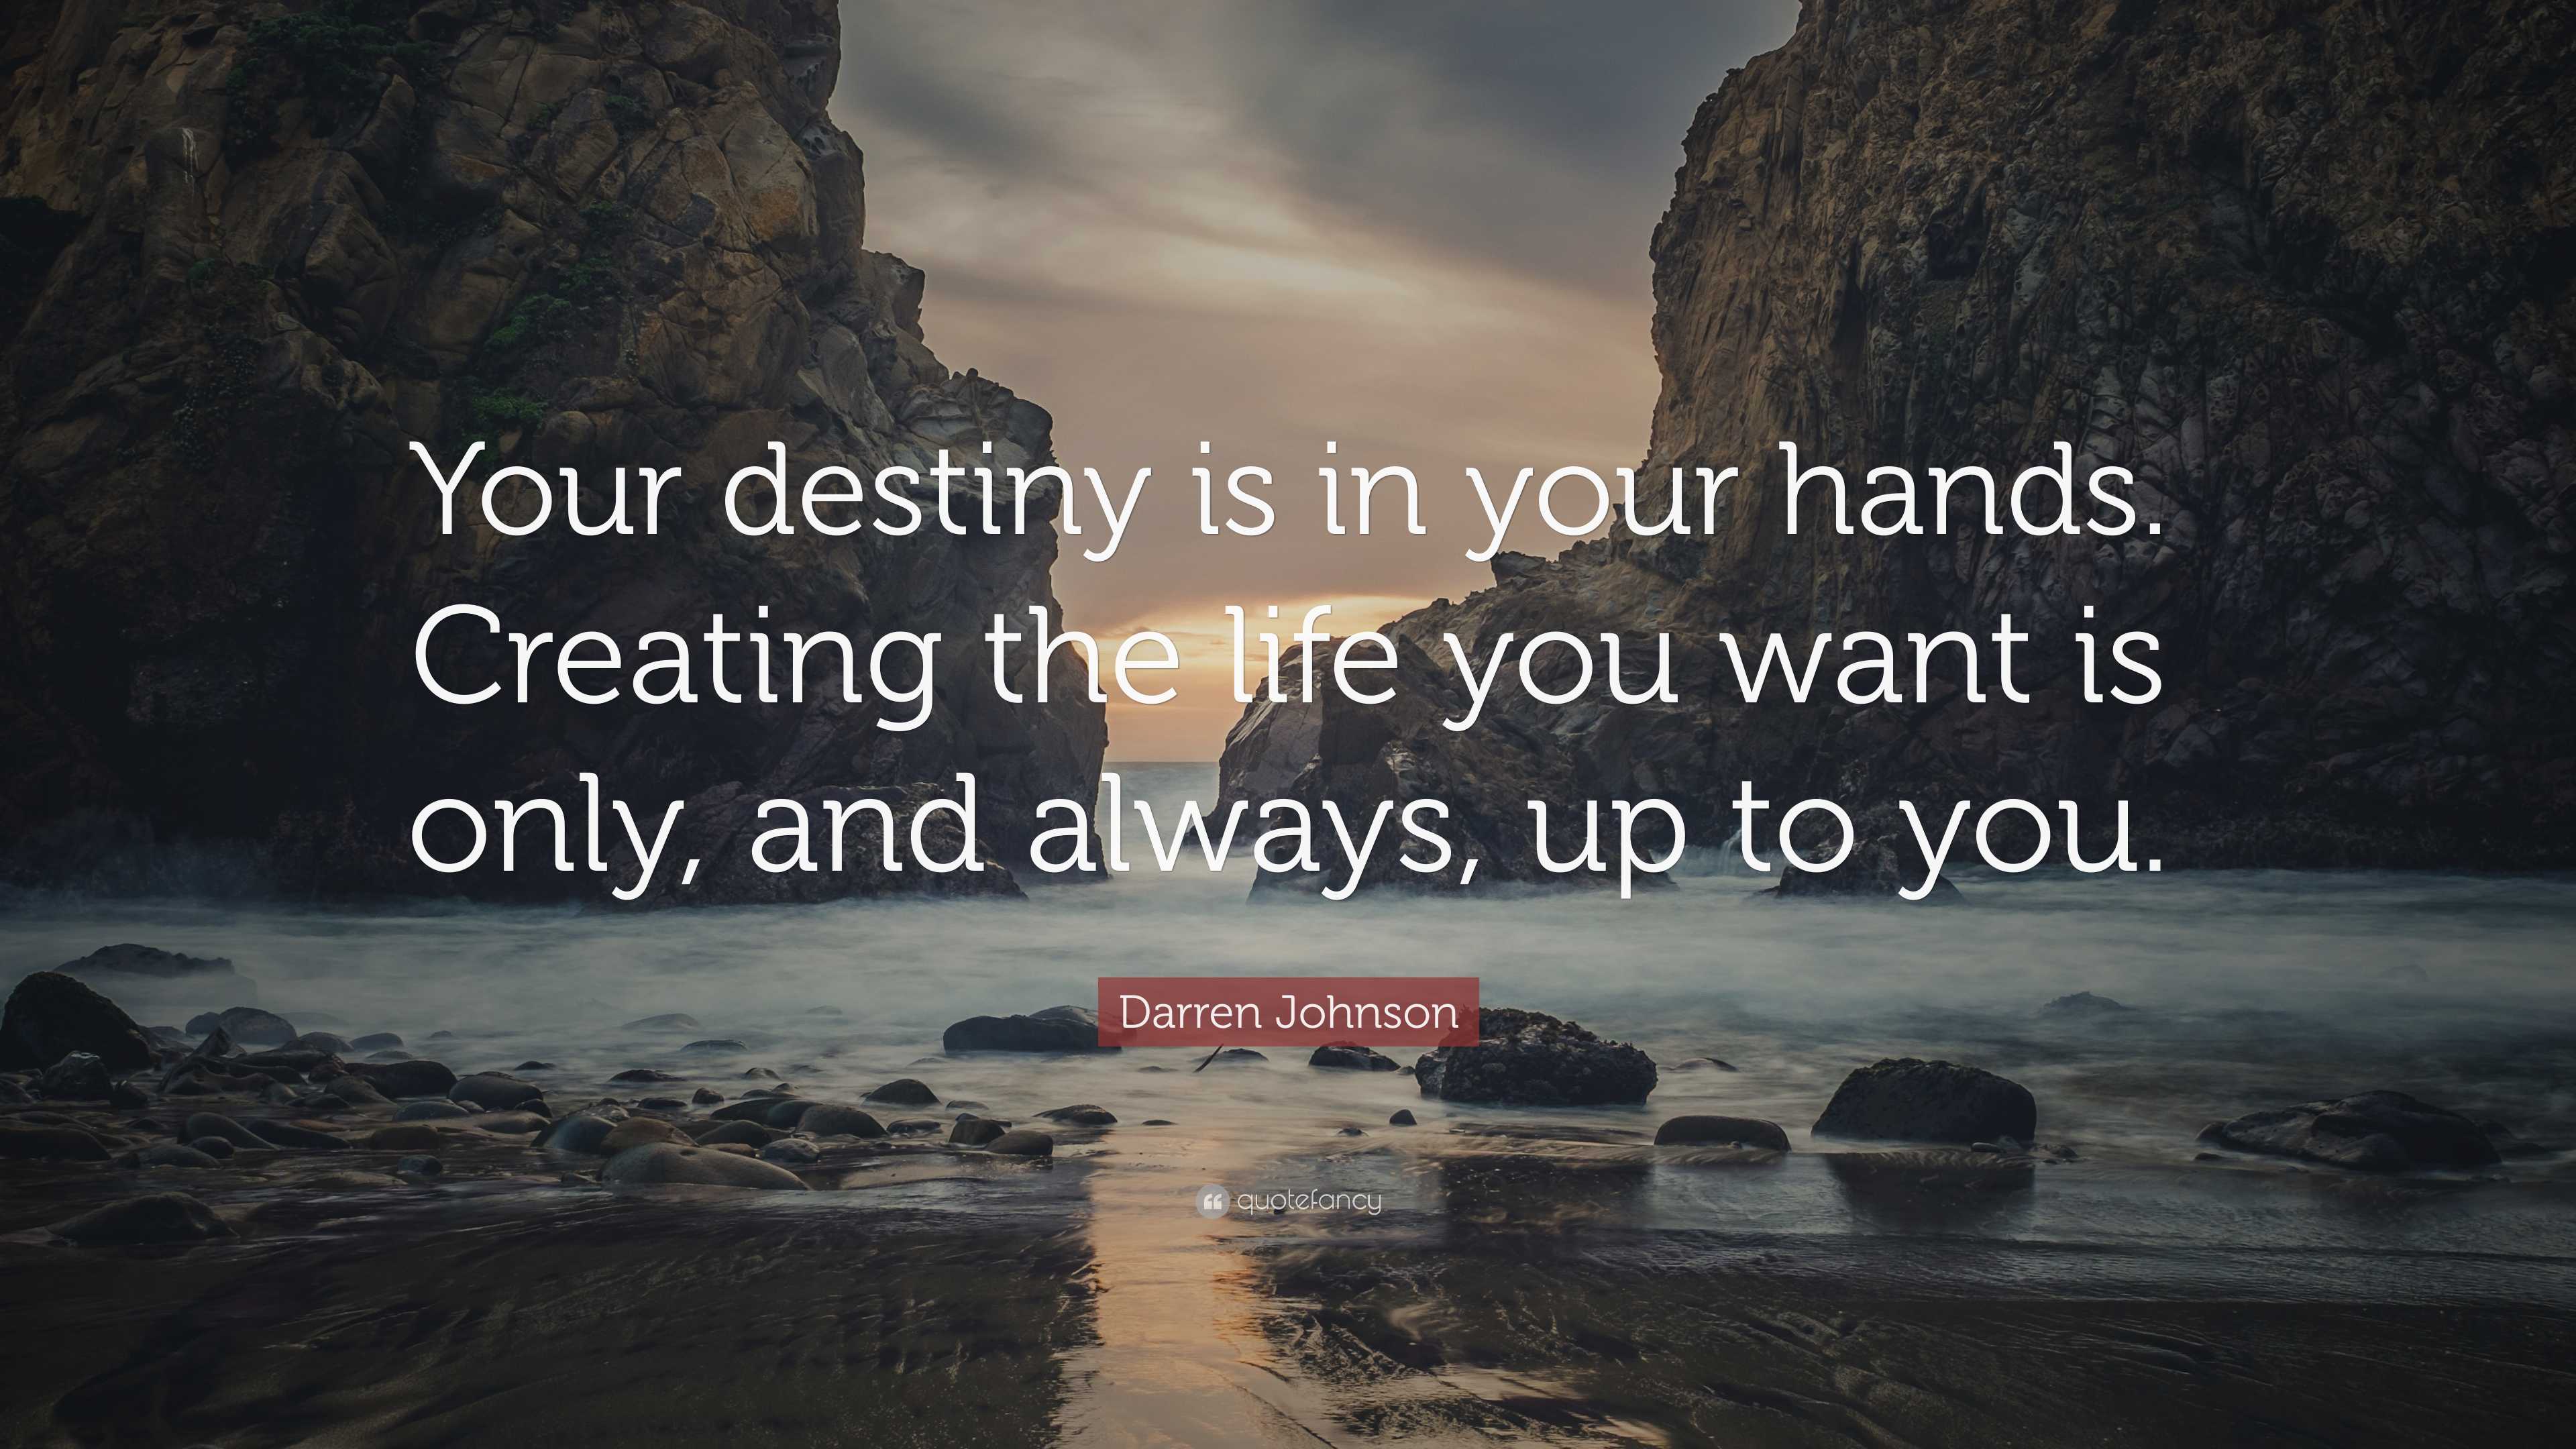 Darren Johnson Quote: “Your destiny is in your hands. Creating the life you  want is only